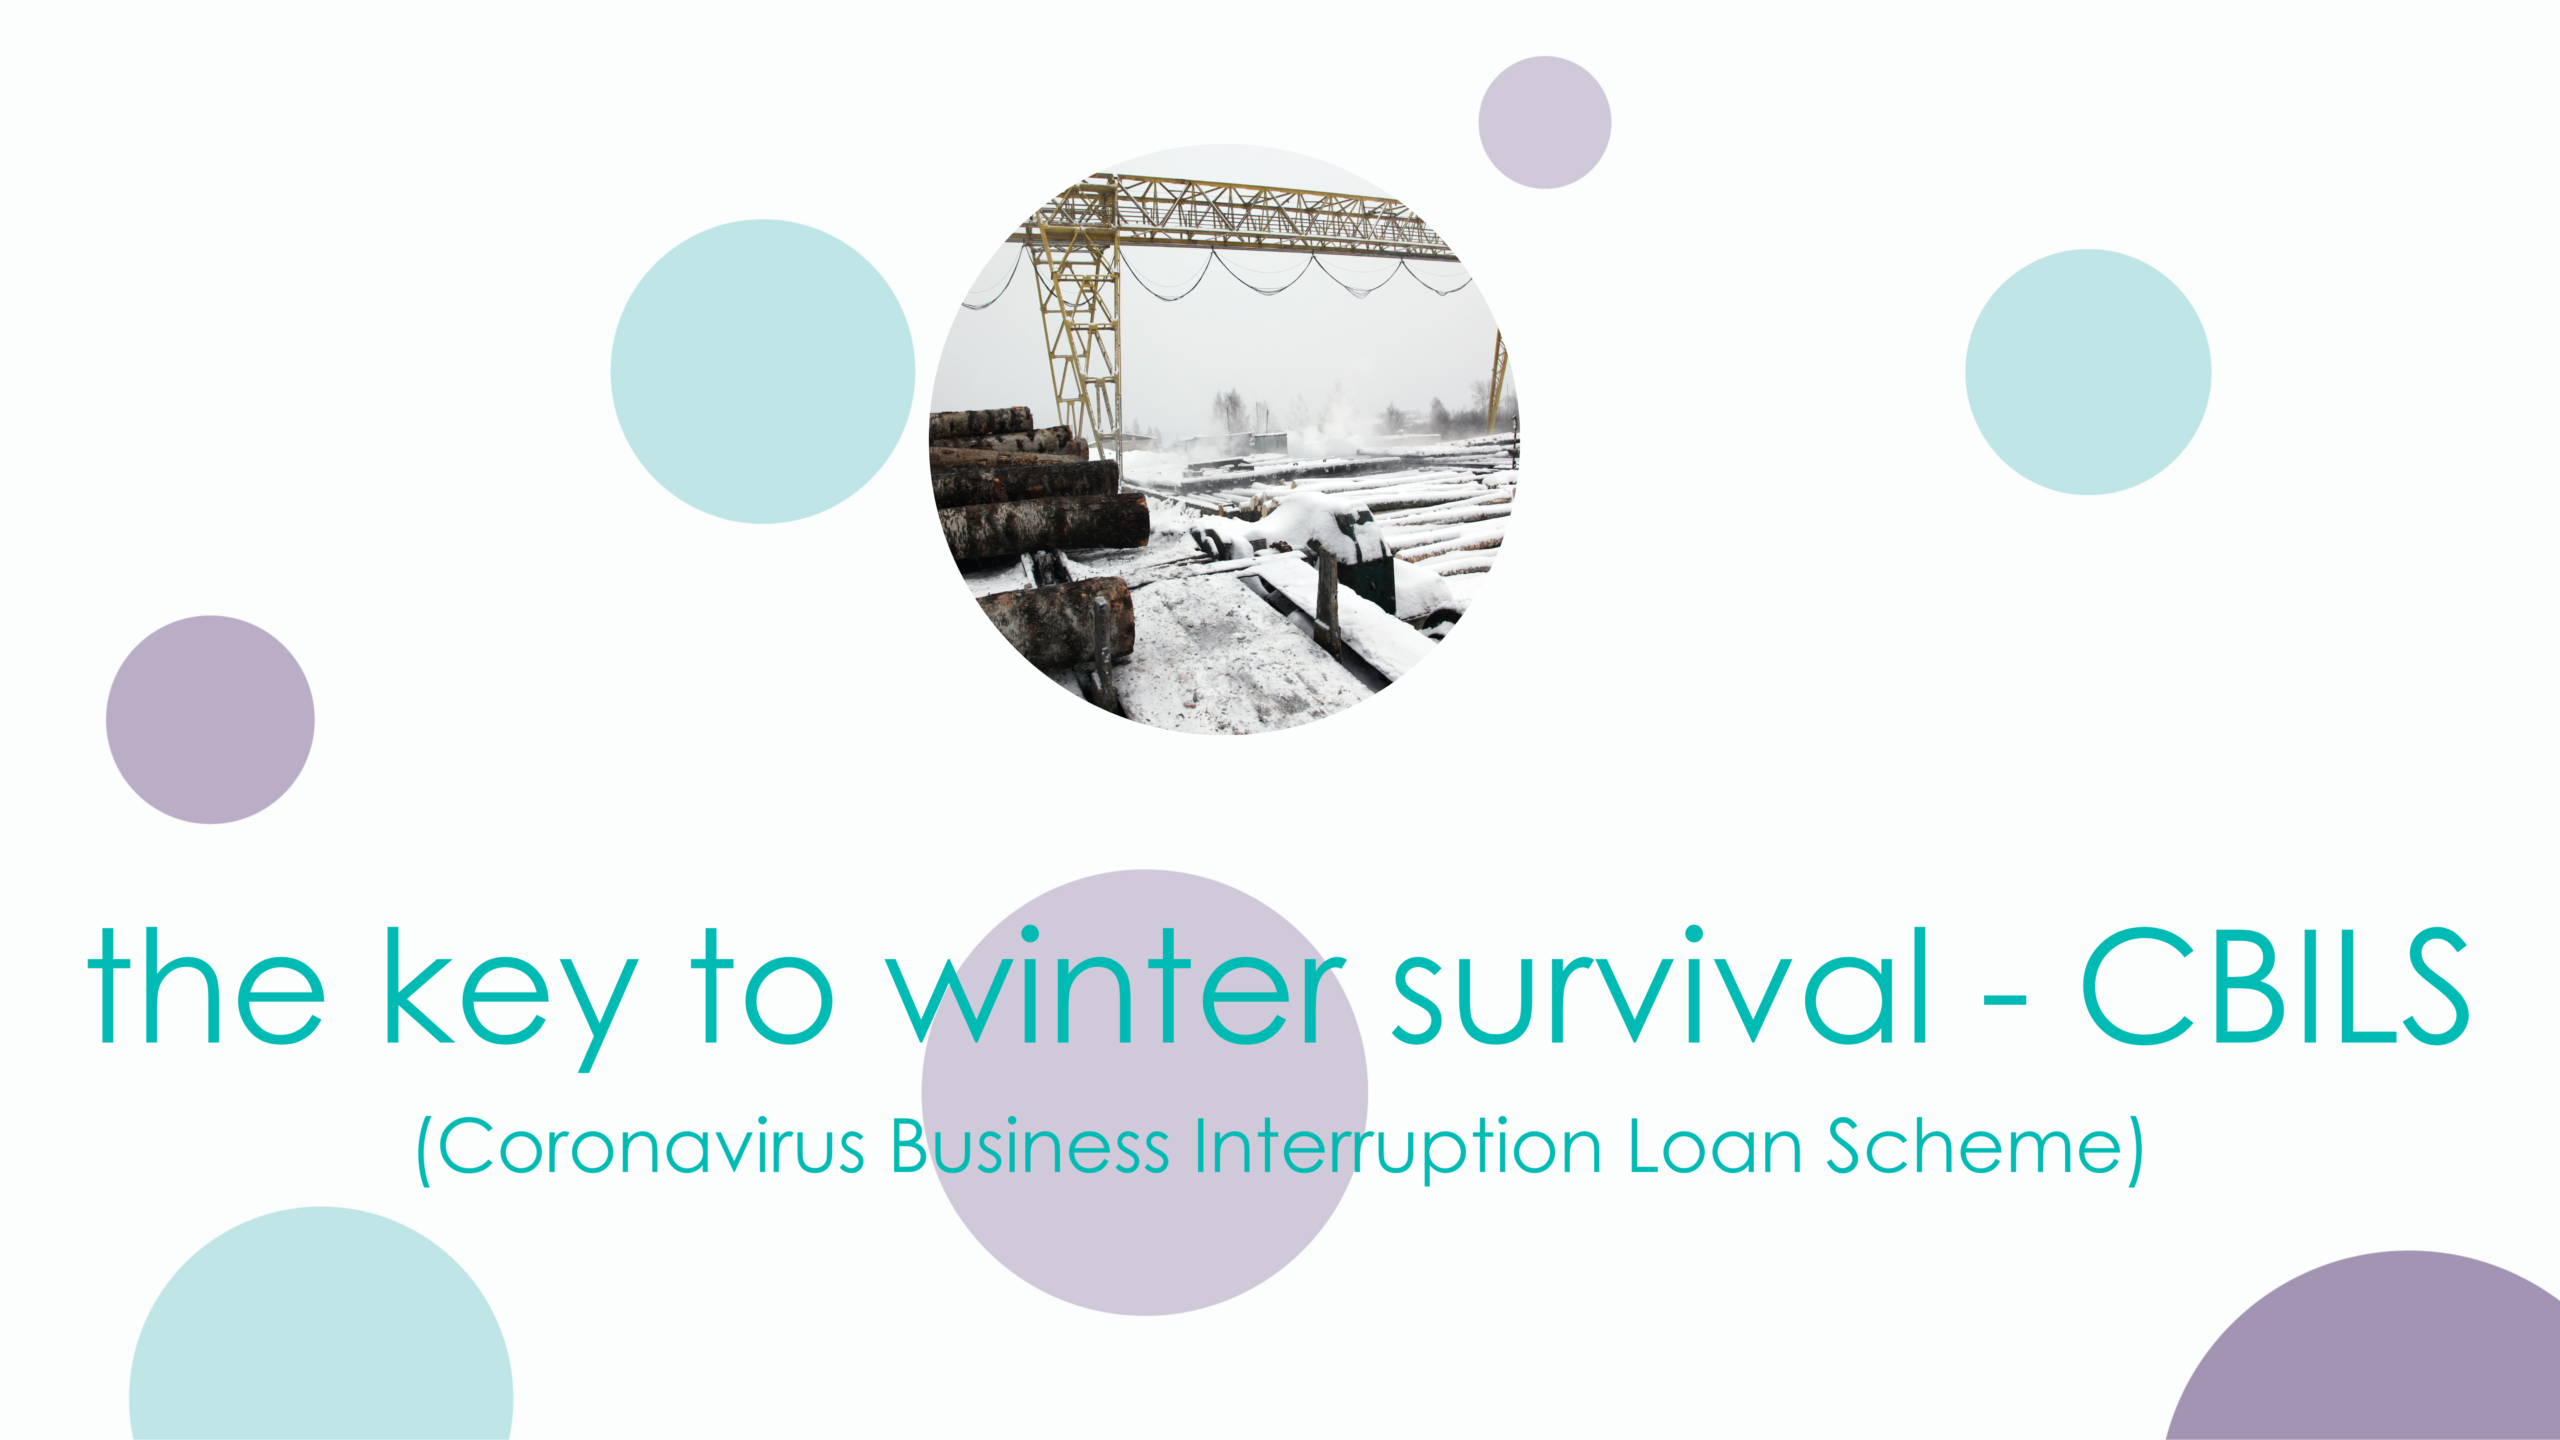 CBILS: the key to winter survival